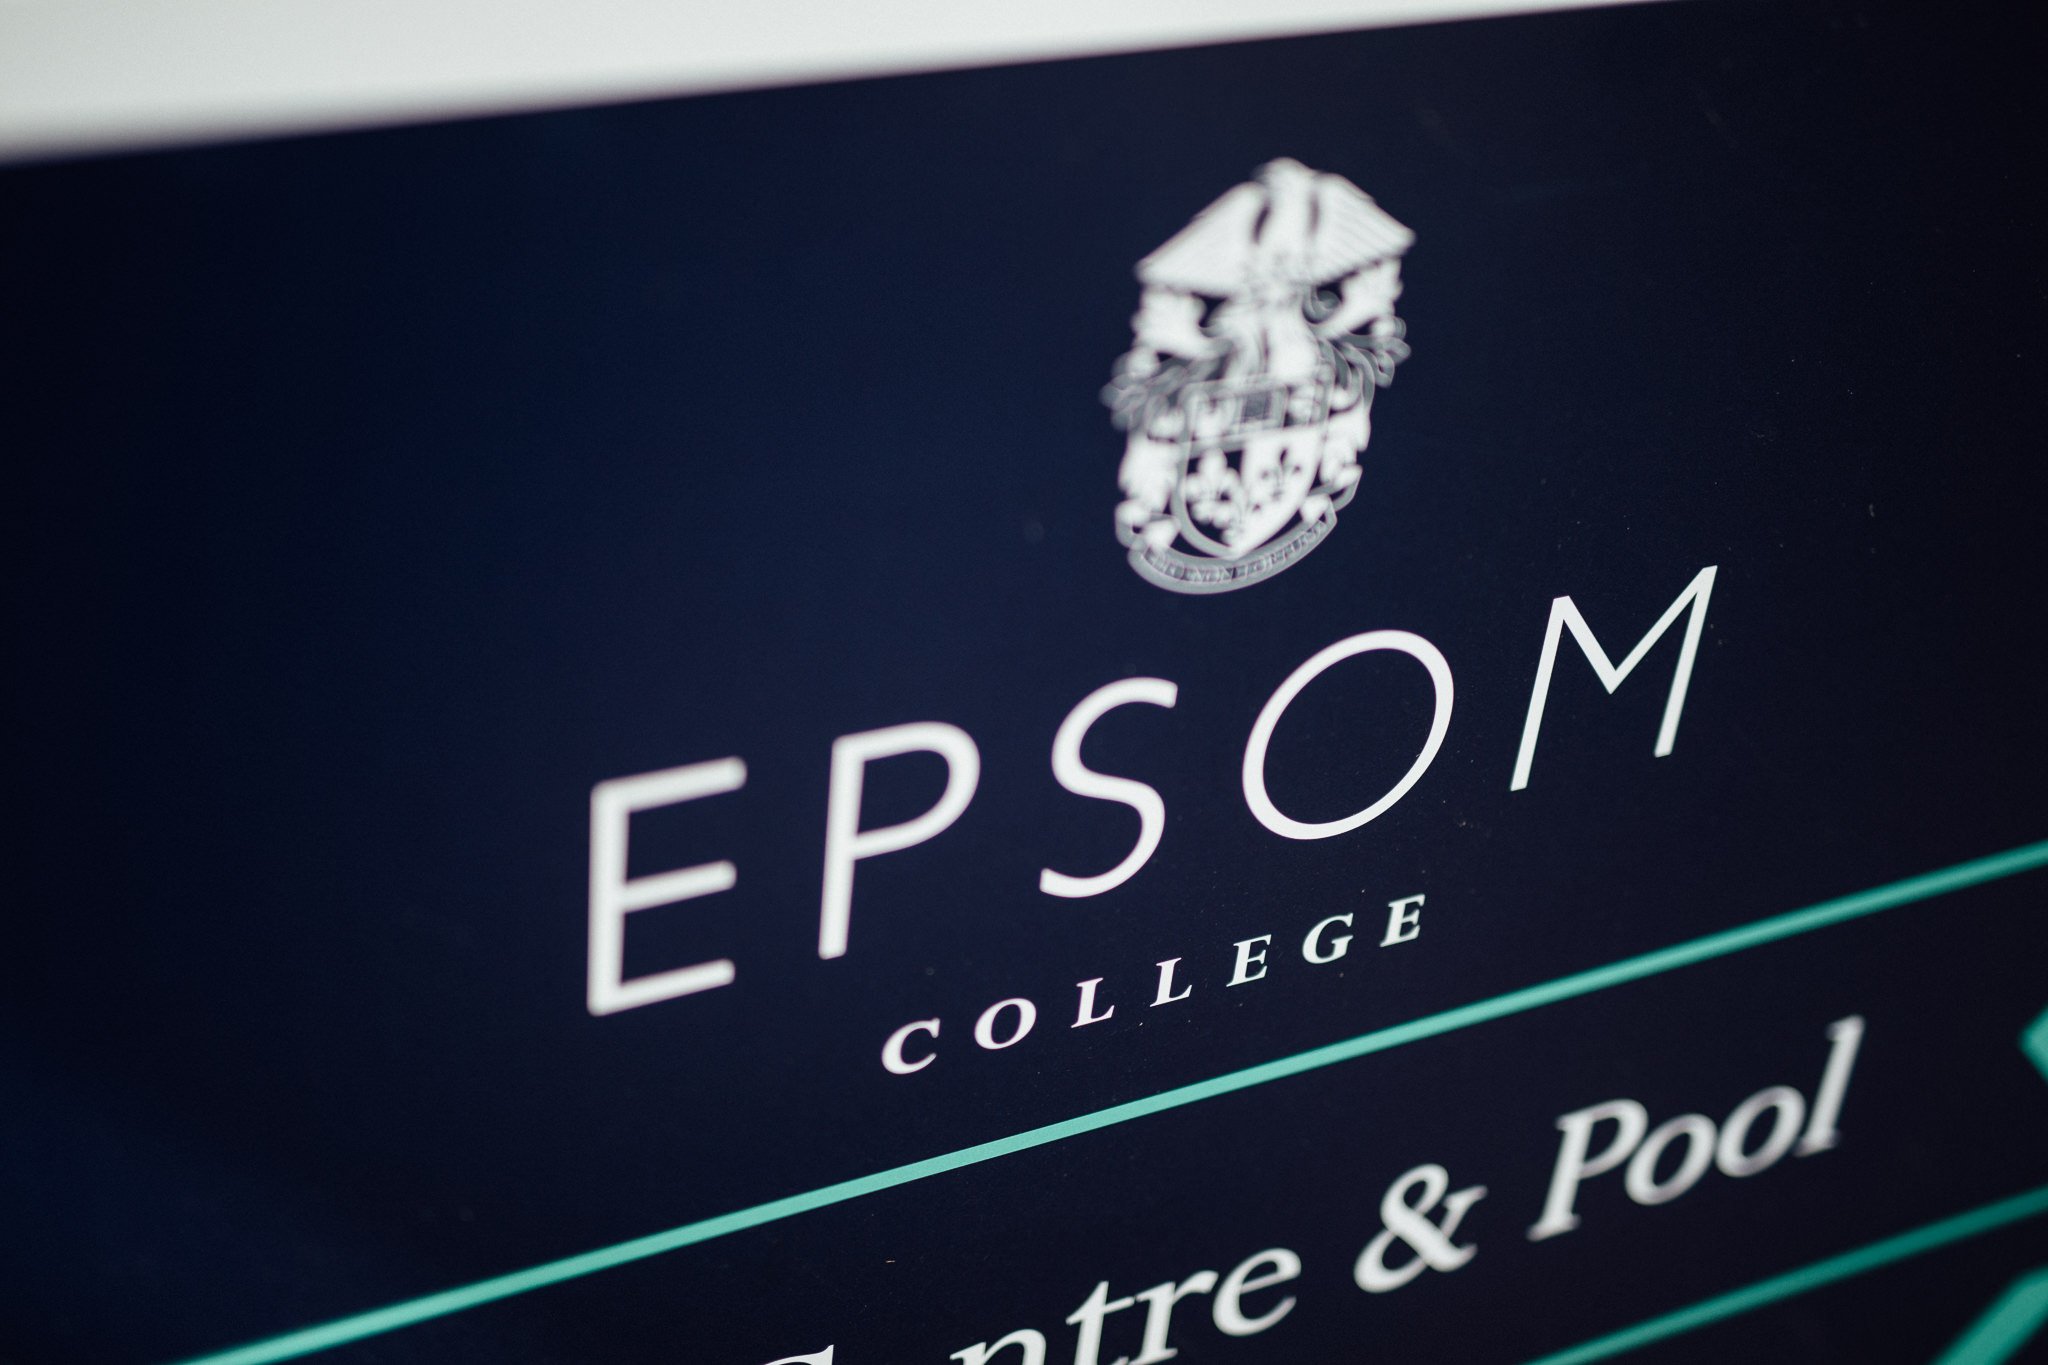  Sign of Epsom College 